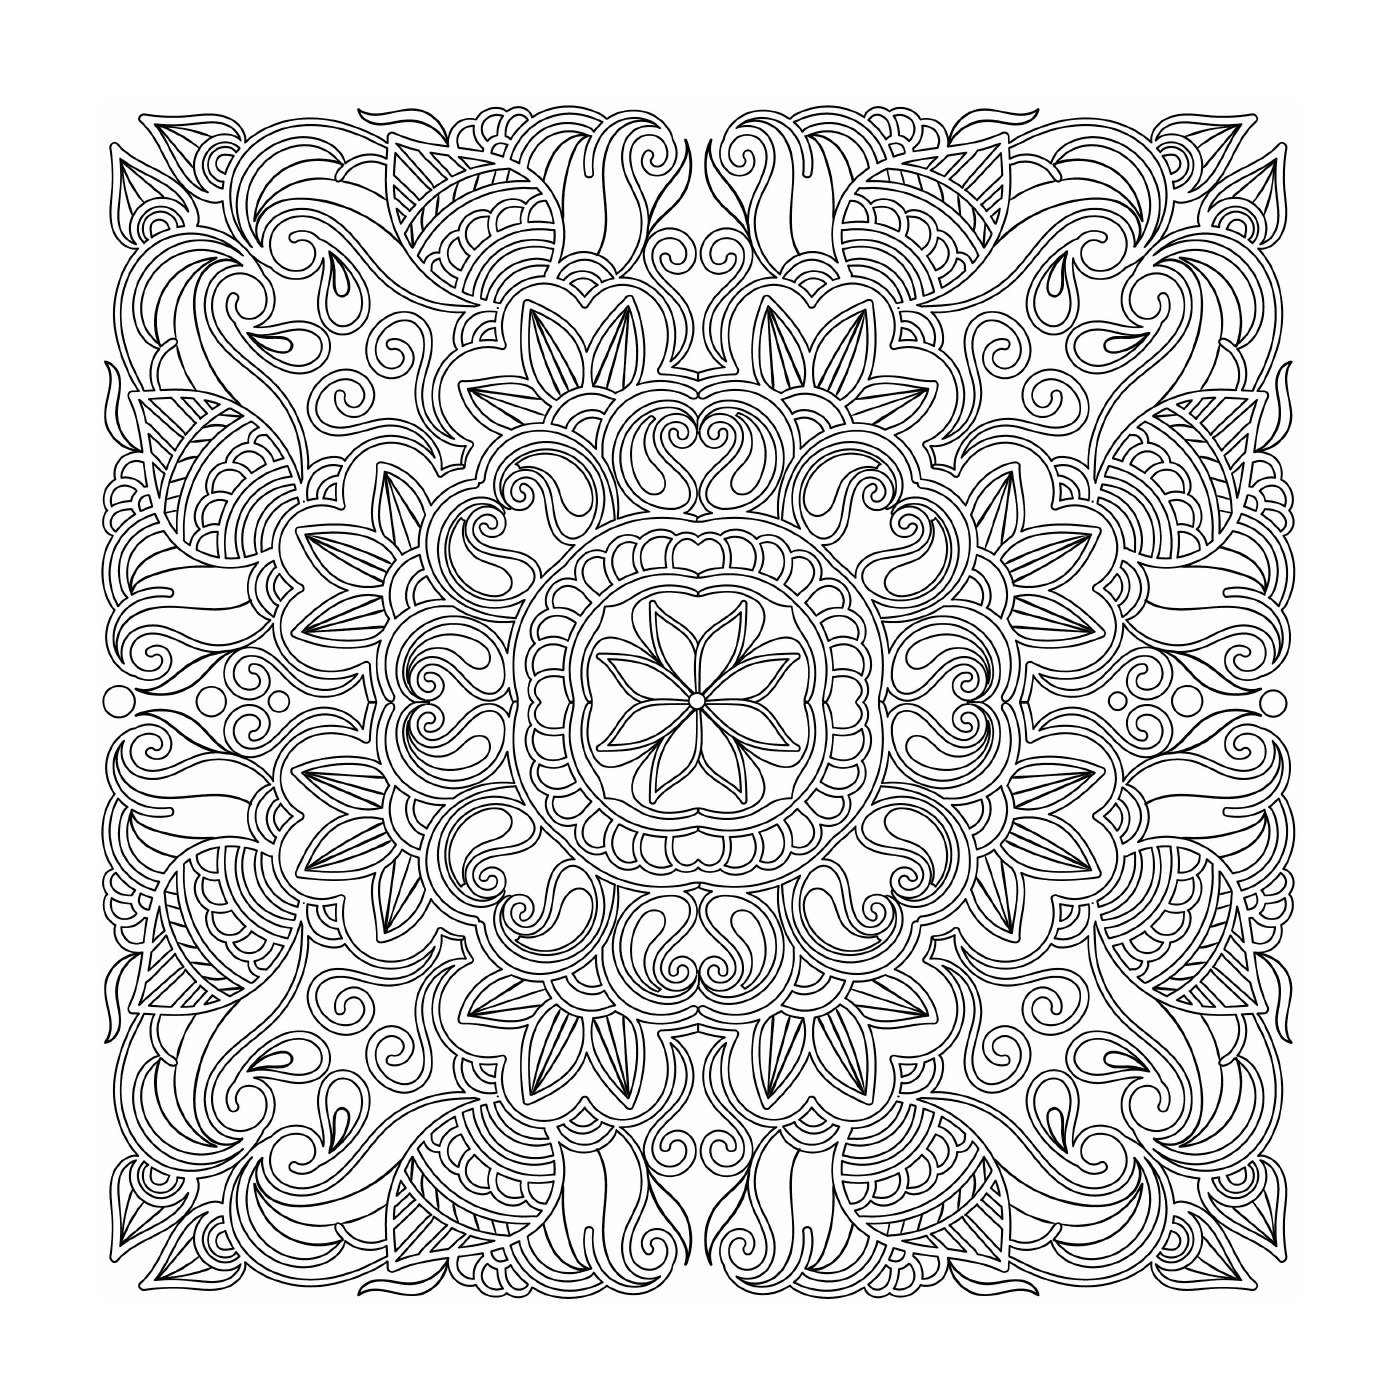  Mandala - complesso Doodle 